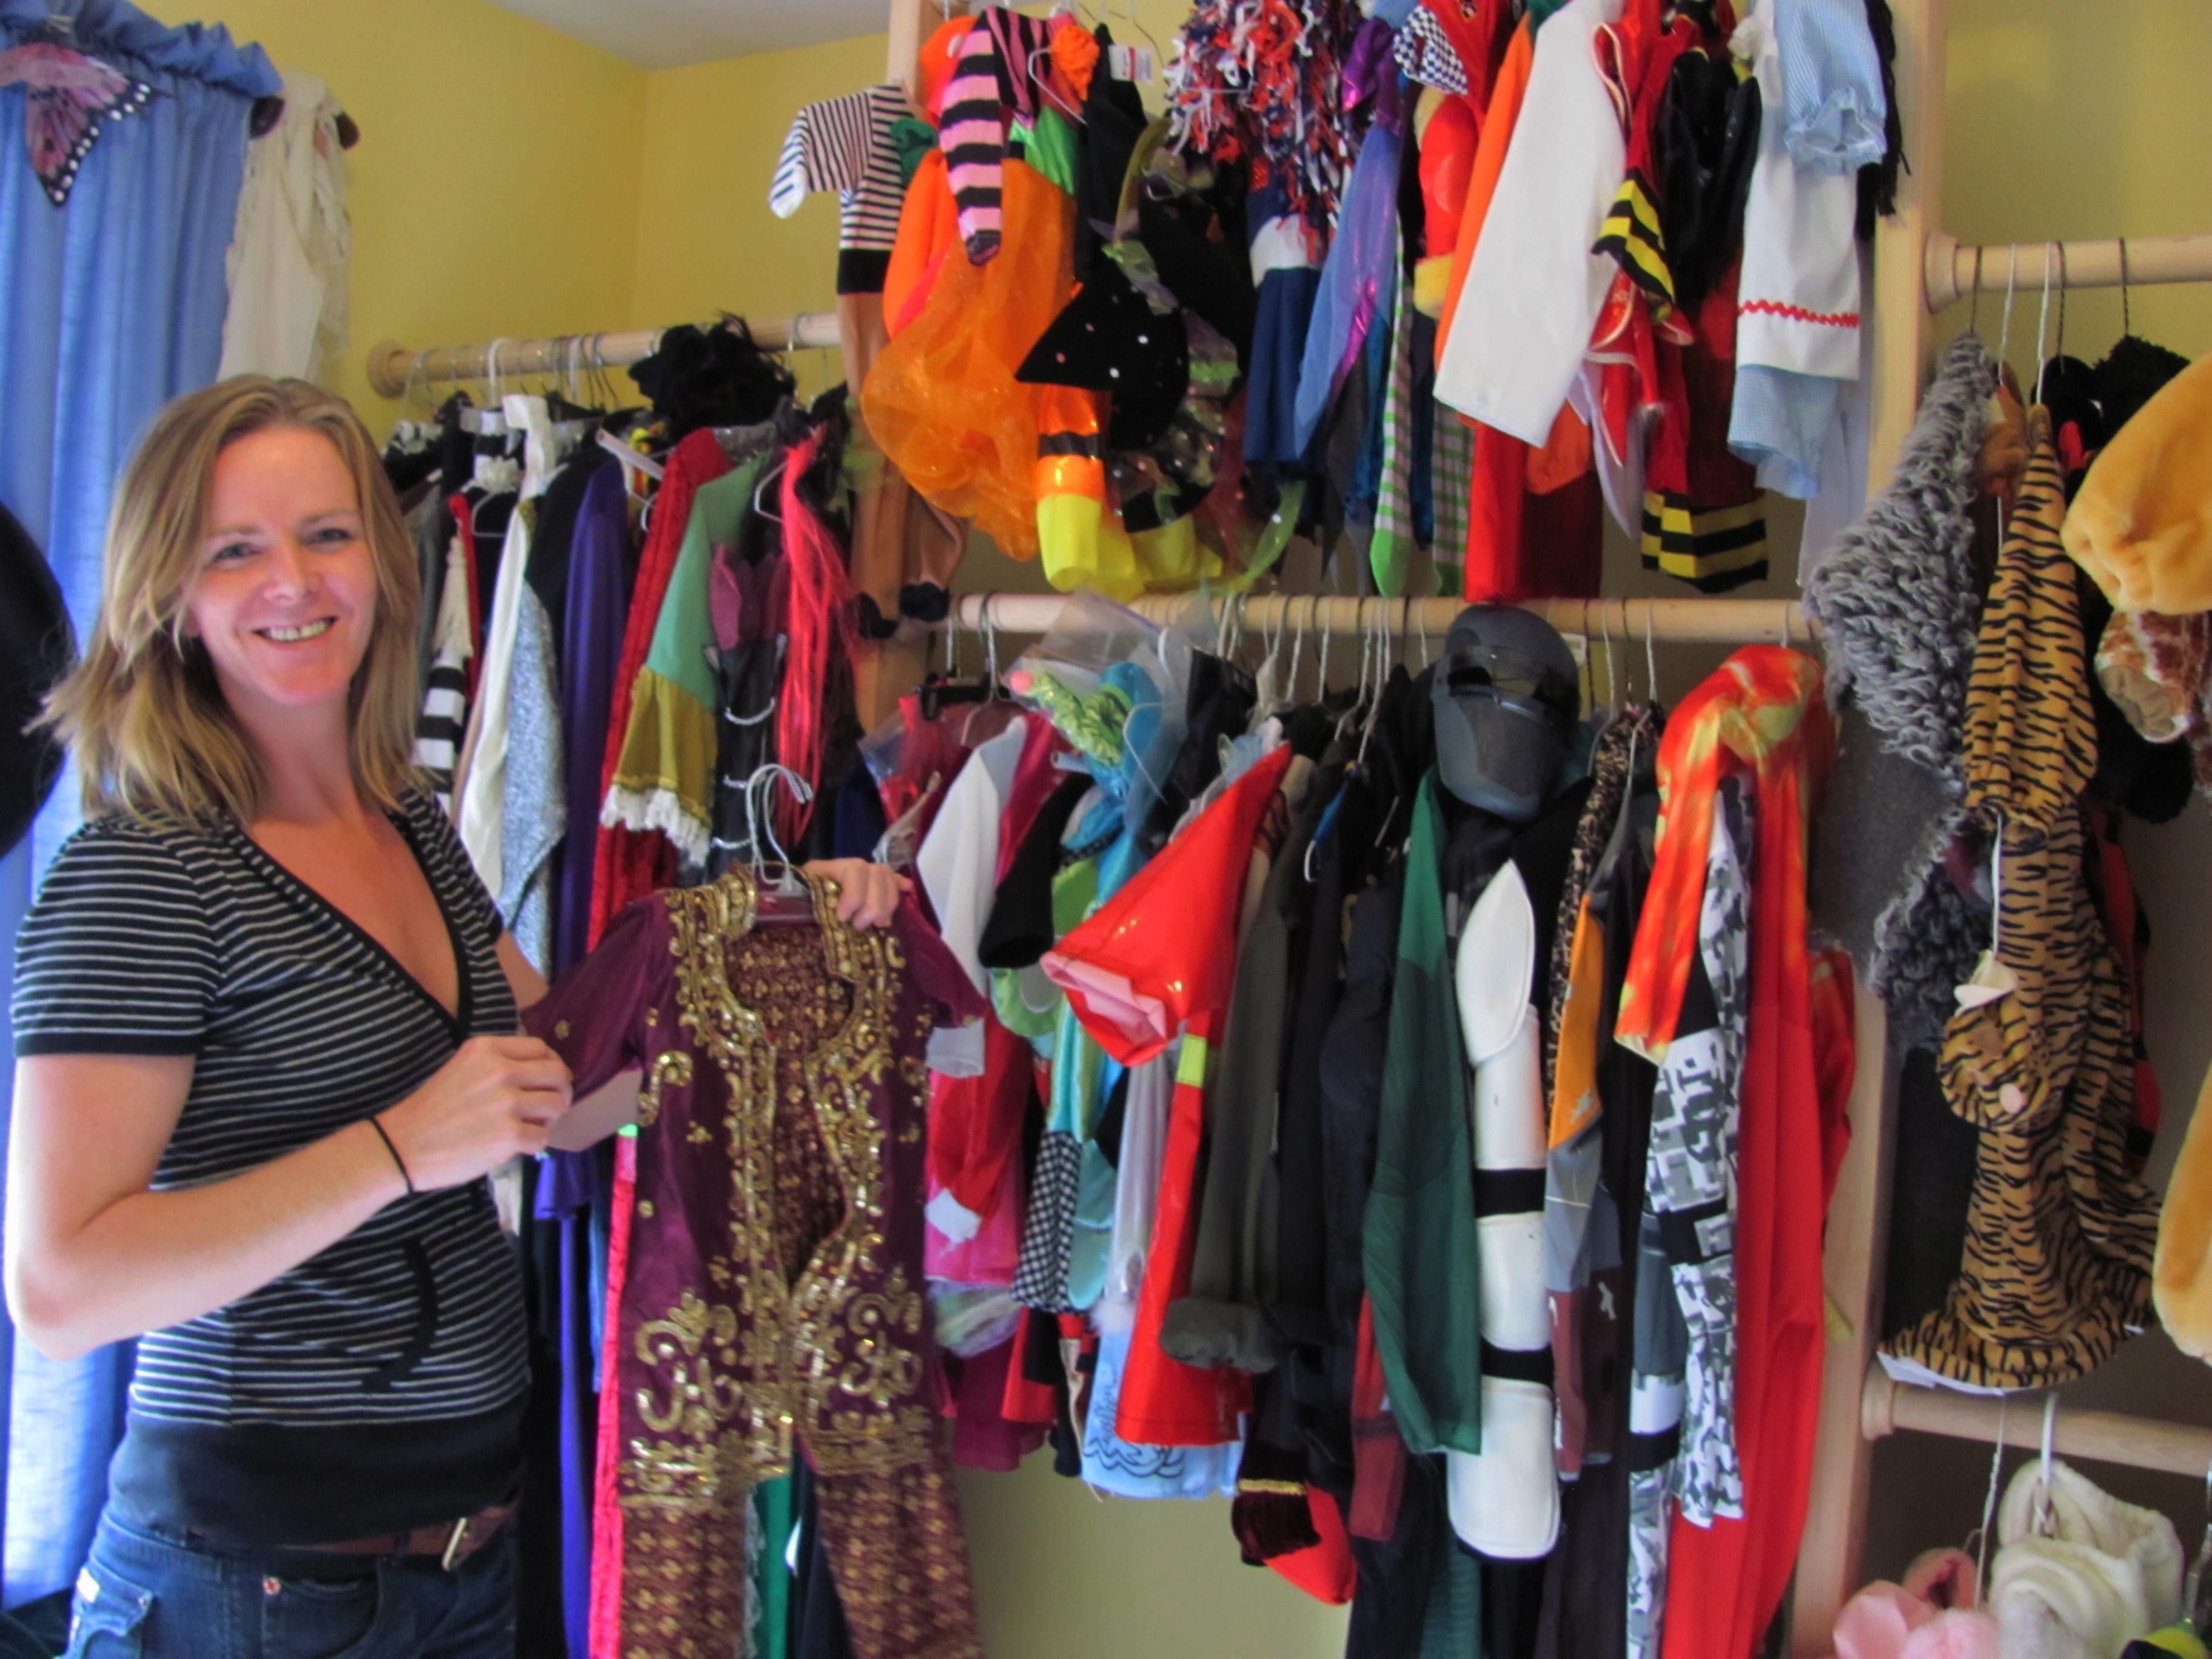 Raina Kennedy has always loved Halloween. The Camas mom of three is helping others have that enjoyment, free of charge, with a lending room of costumes for Halloween and other occasions in her home.